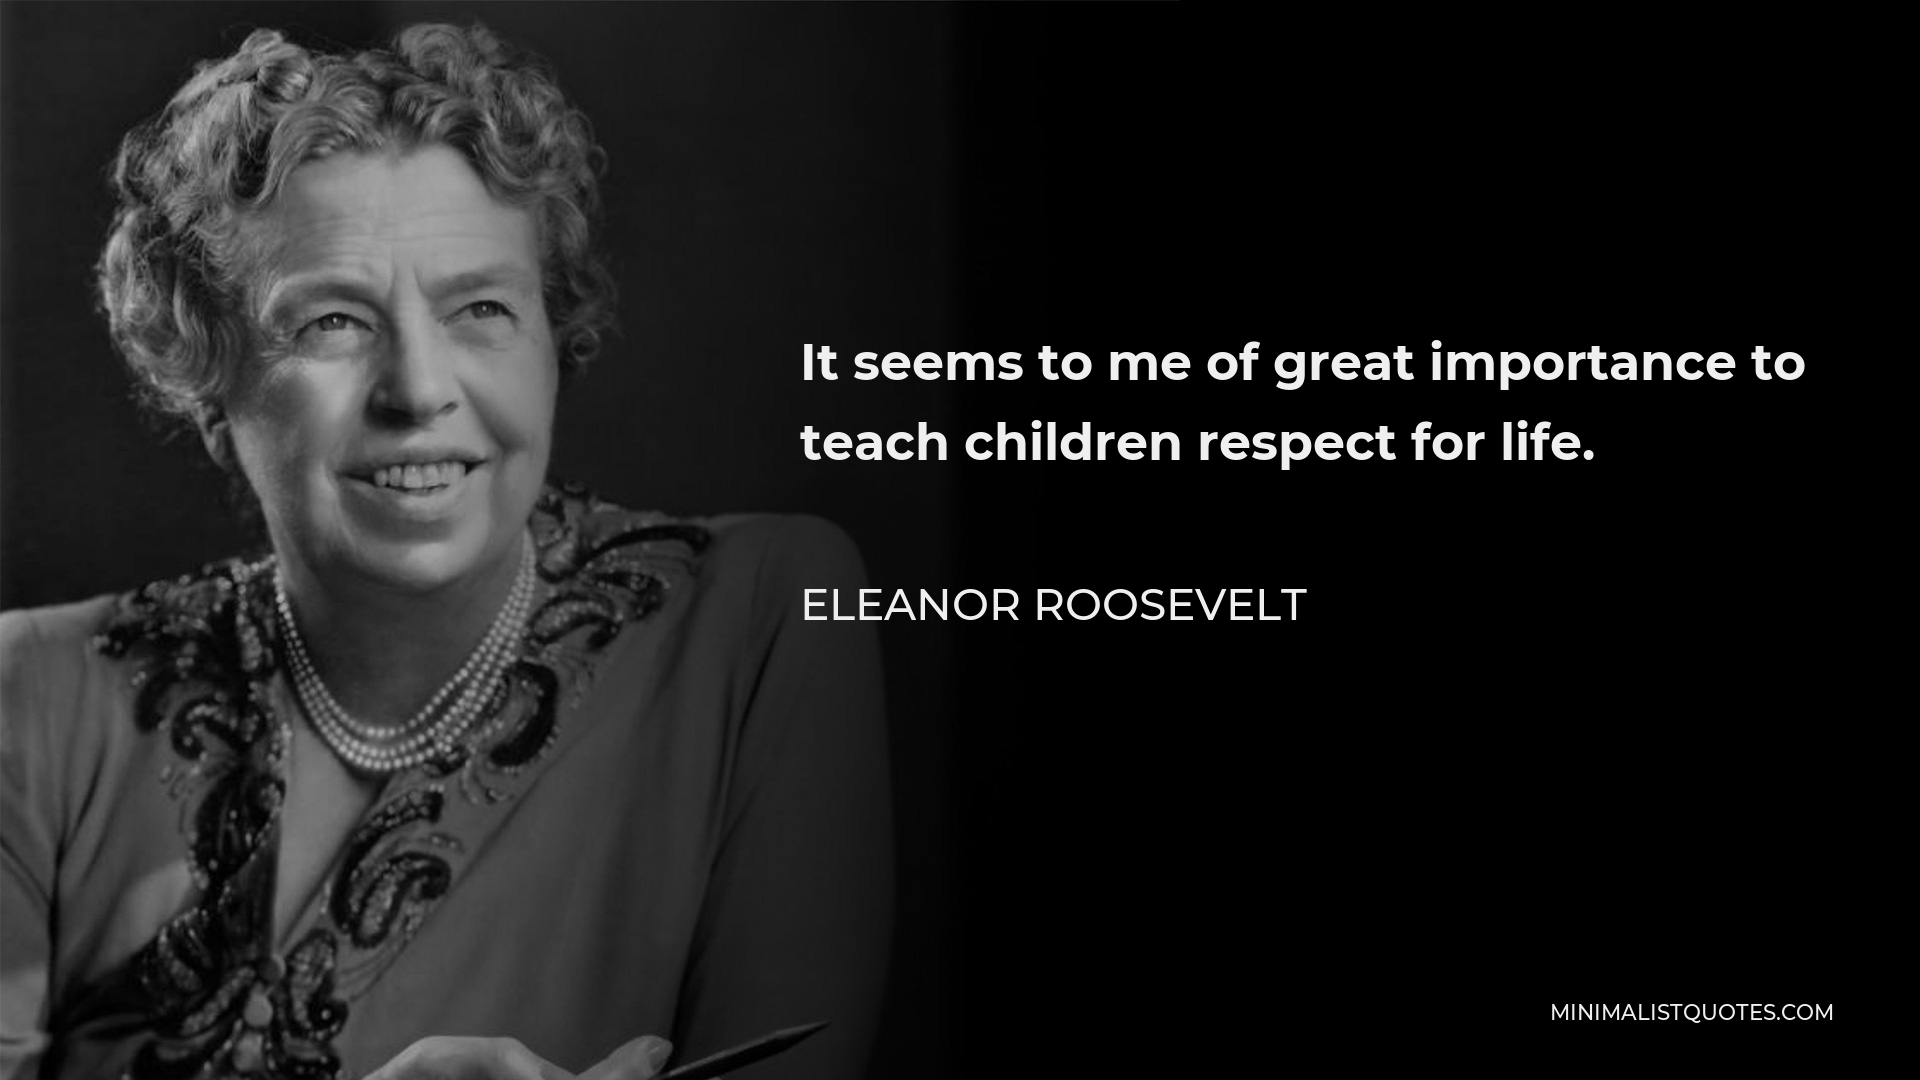 Eleanor Roosevelt Quote - It seems to me of great importance to teach children respect for life.